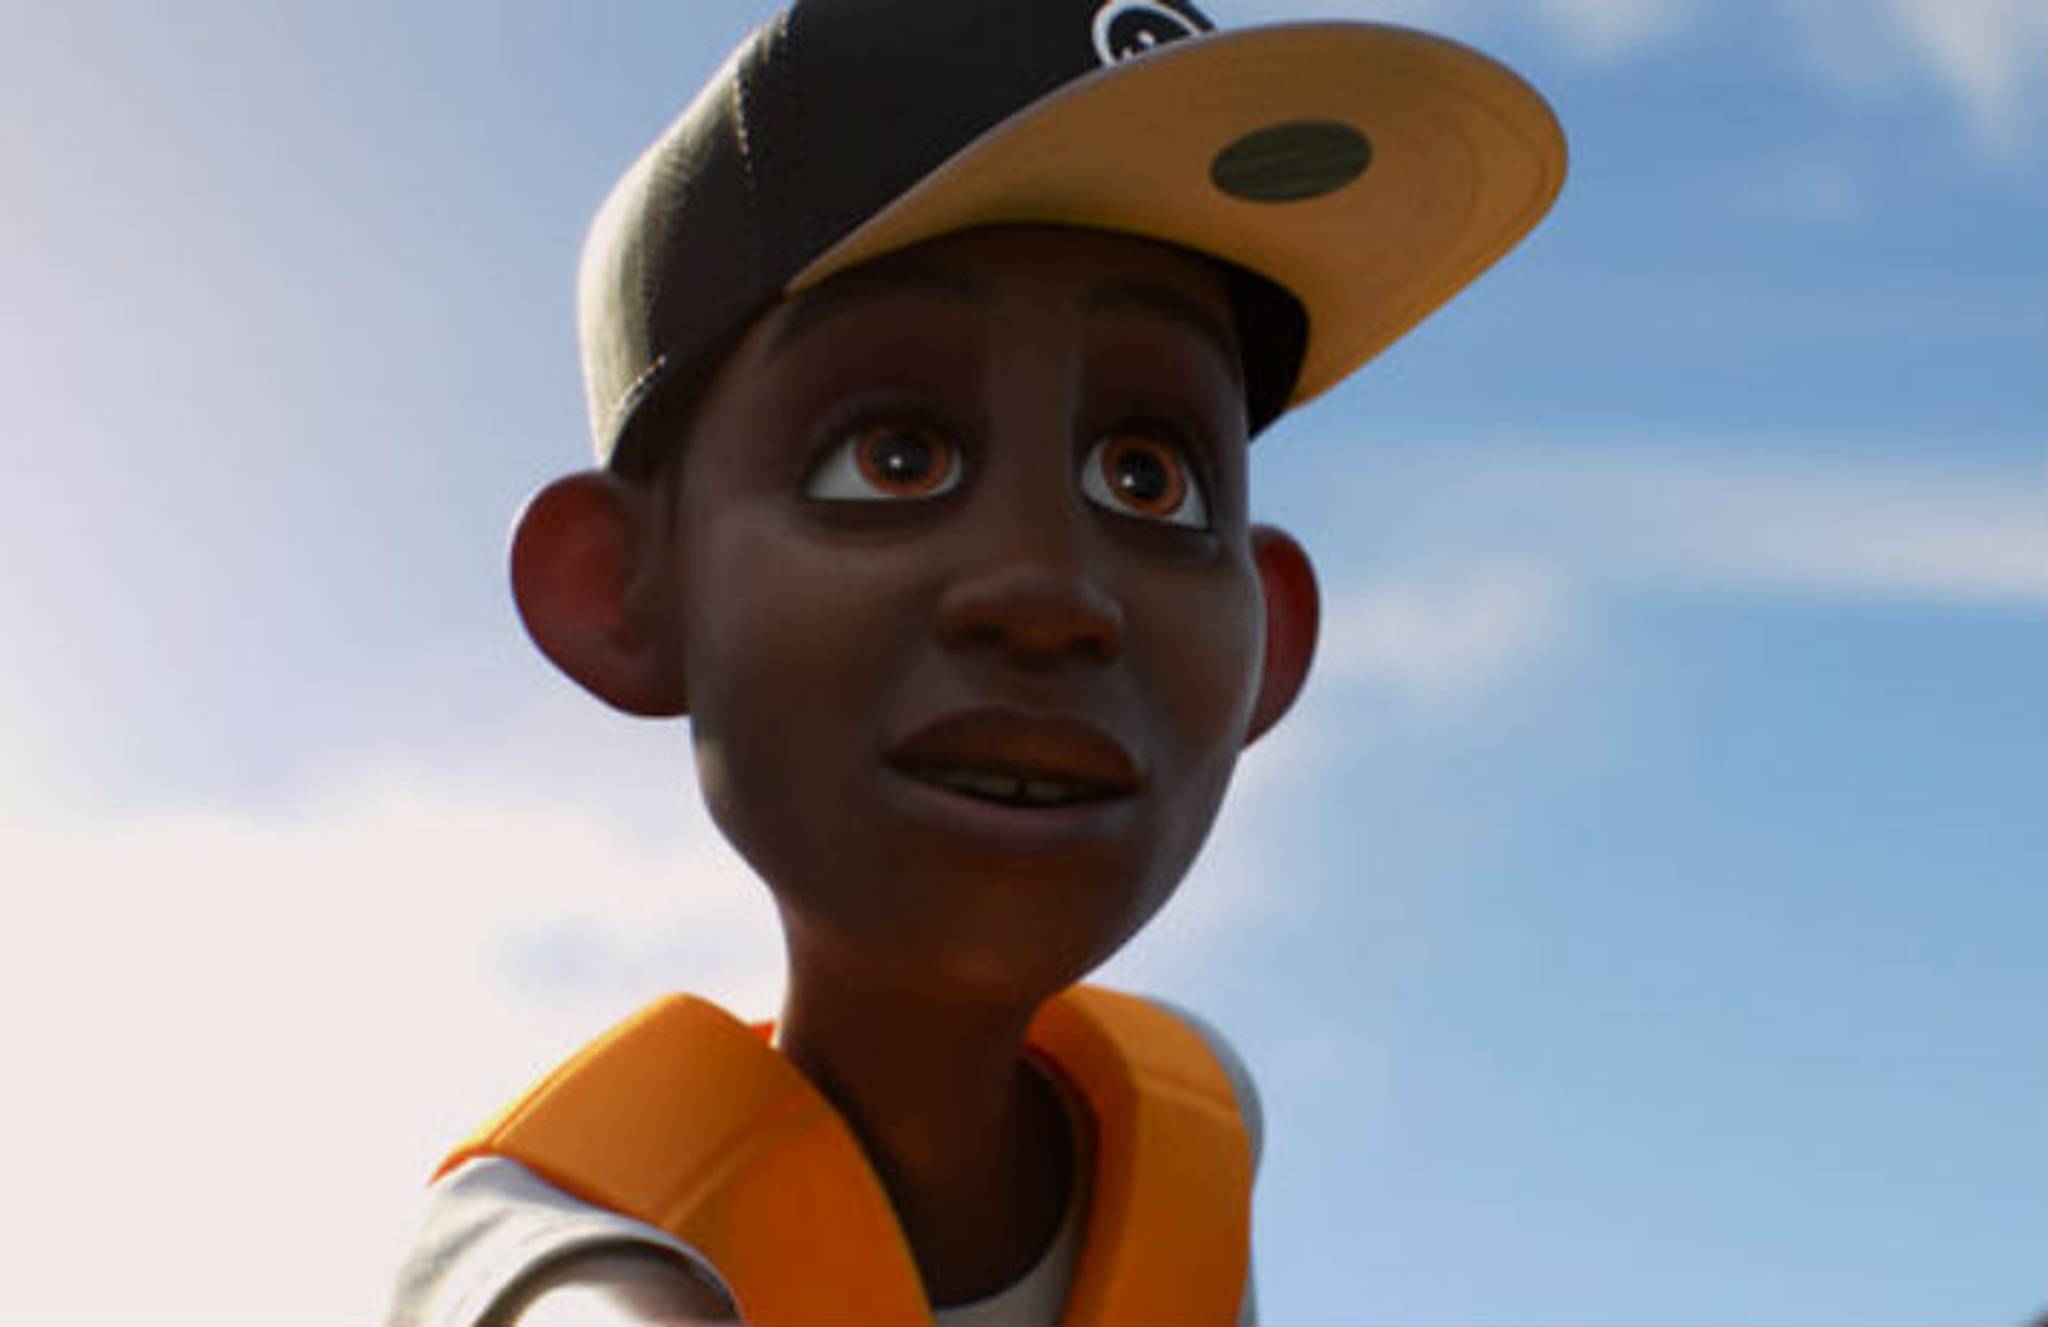 Pixar’s SparkShorts pushes diverse voices in animations